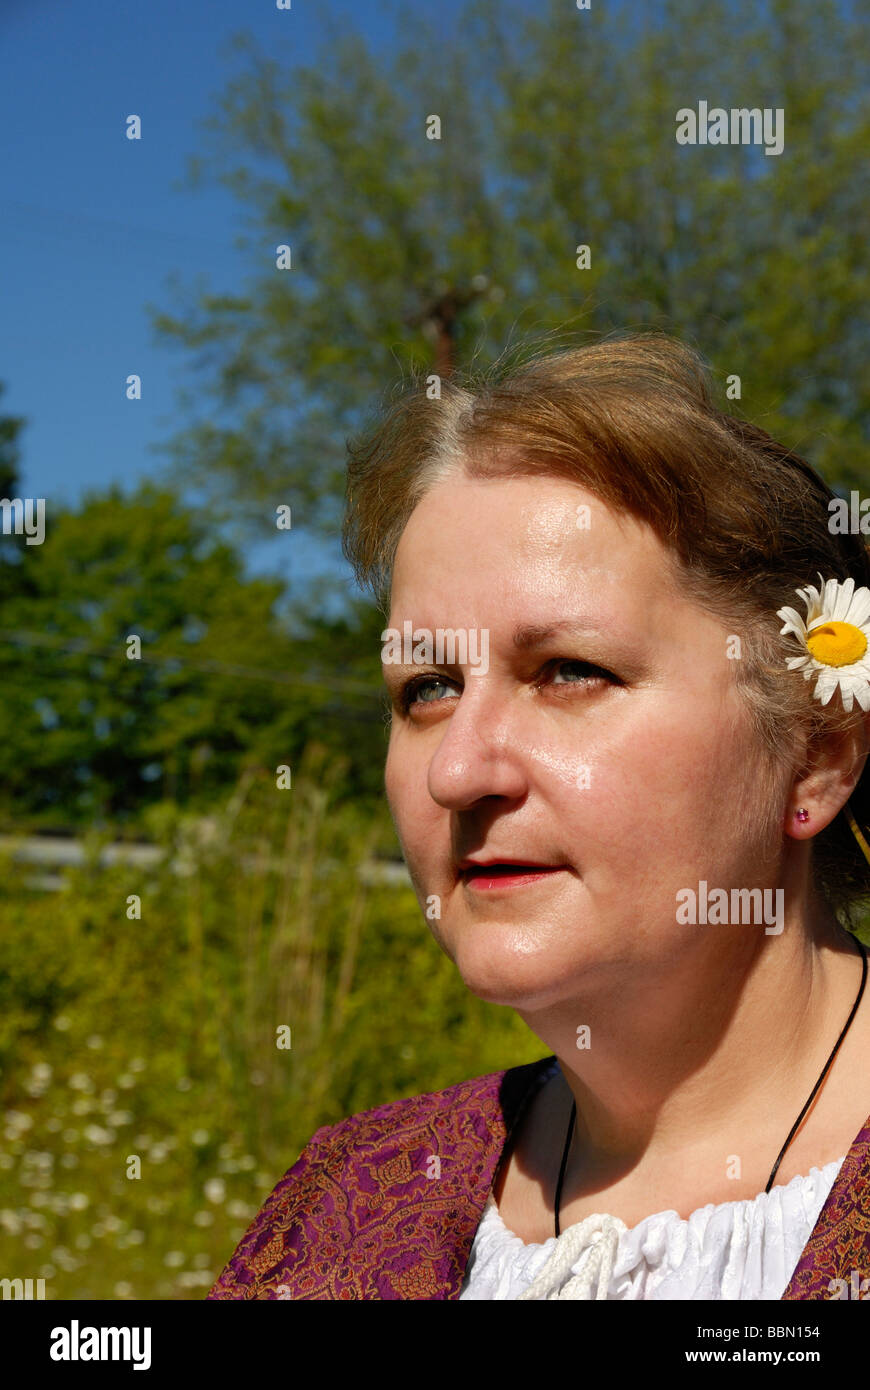 woman in field with flower in her hair Stock Photo